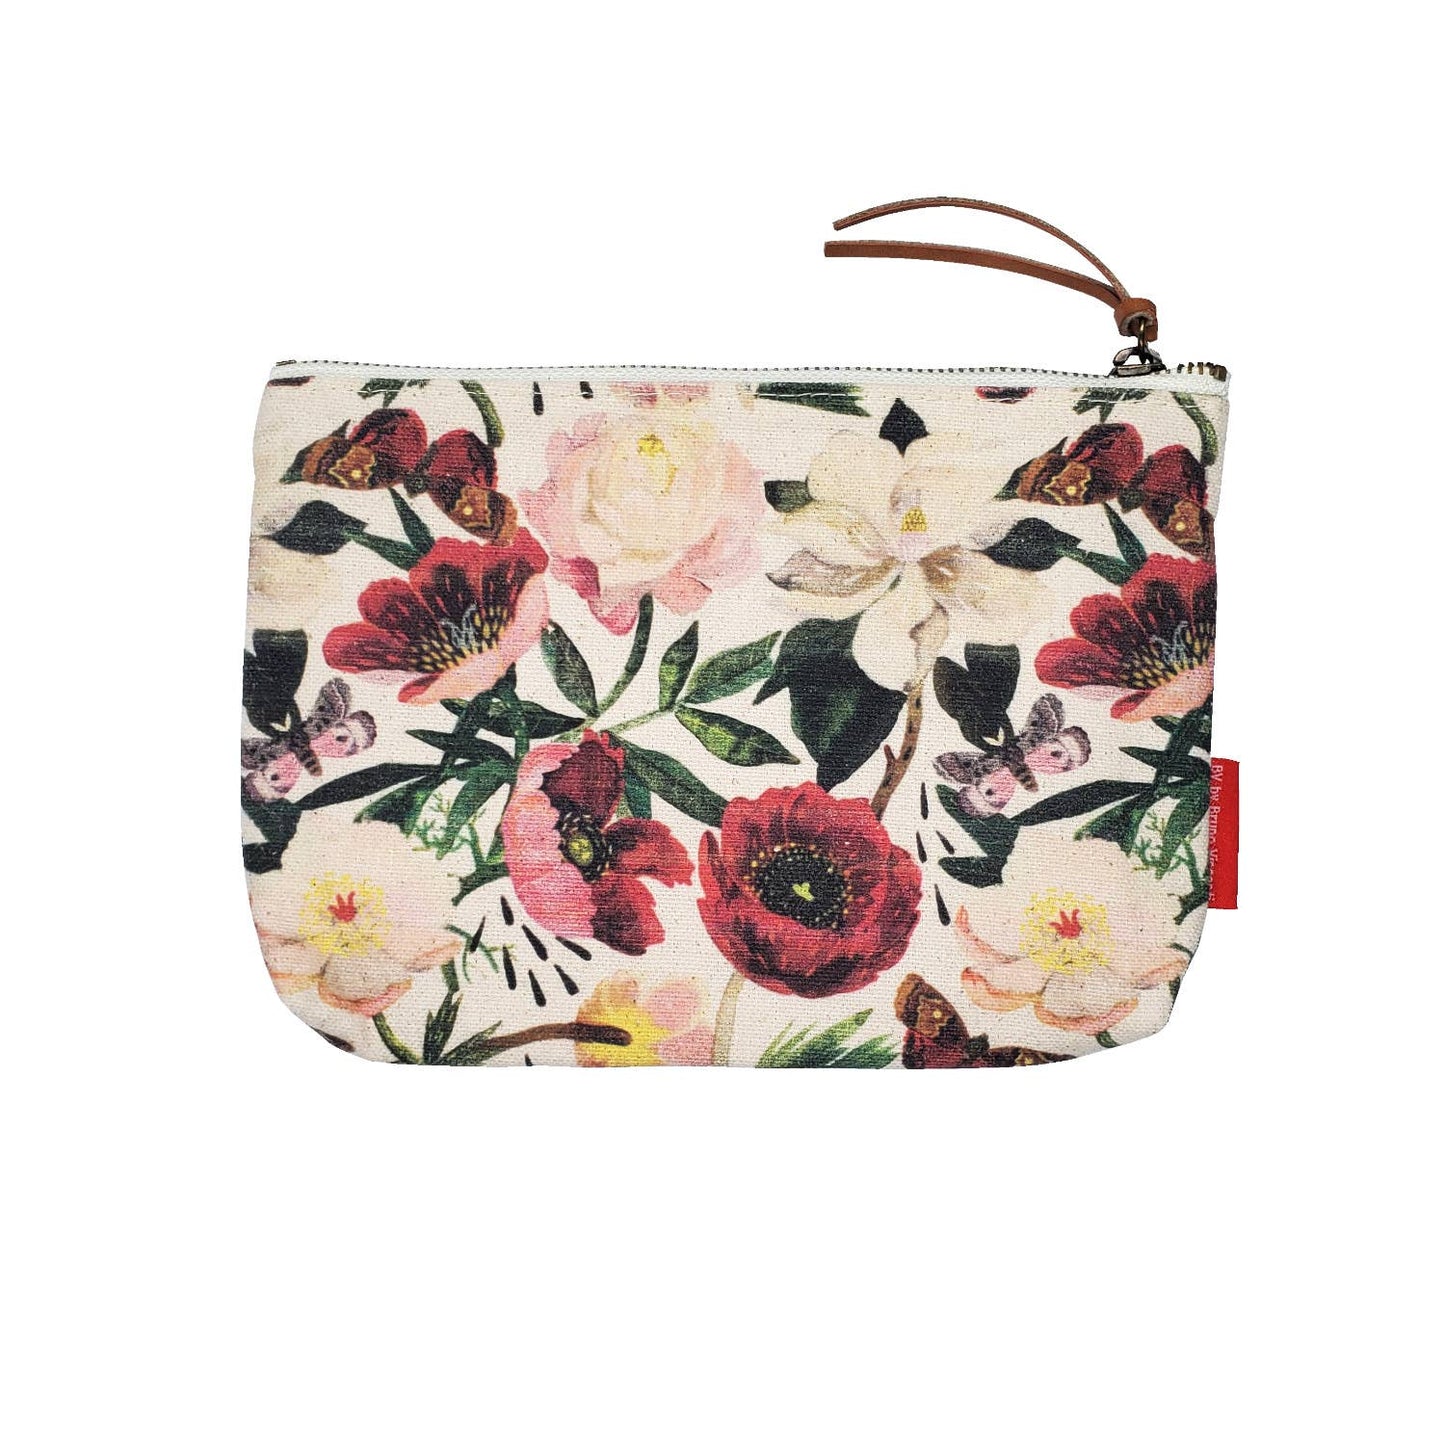 BV by Bruno Visconti - Pouch - Peonies